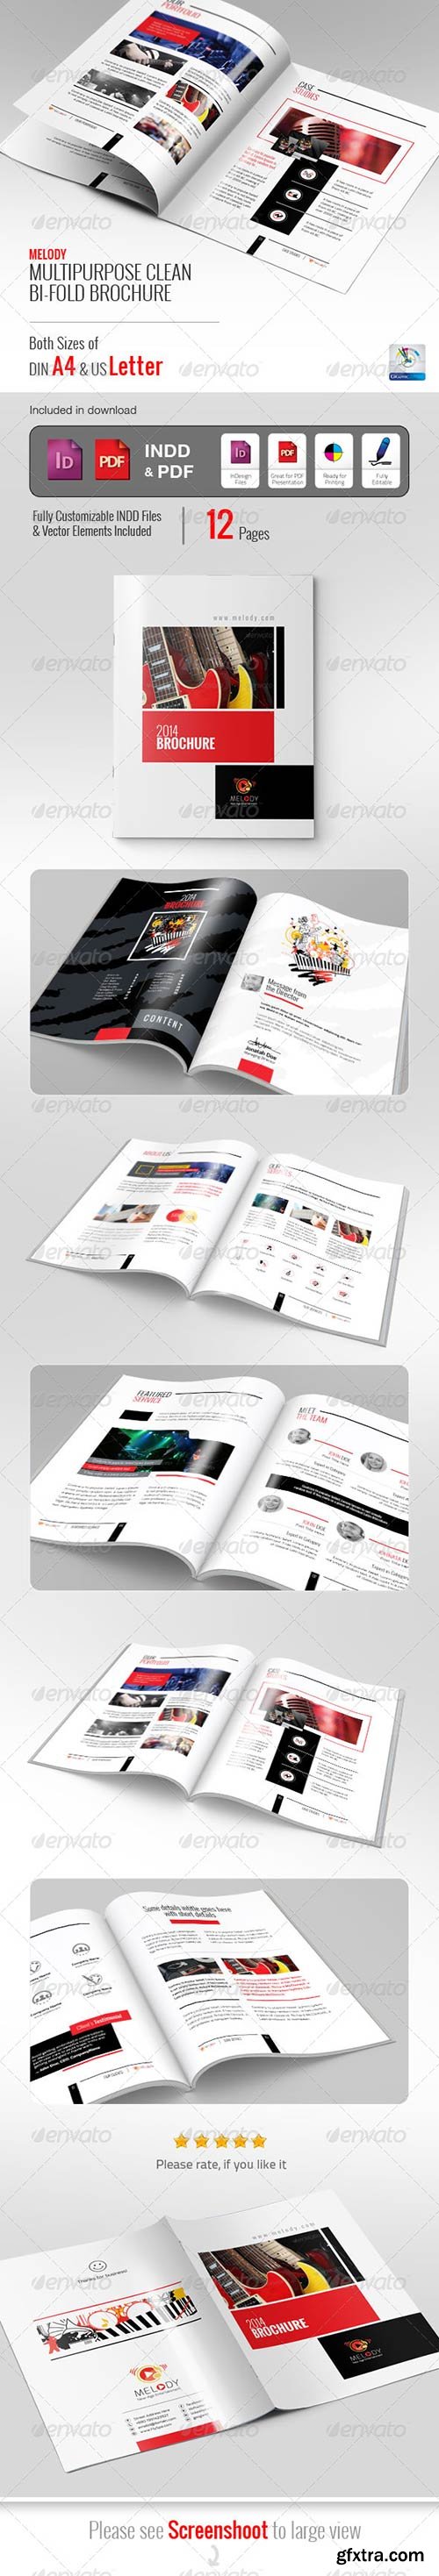 Graphicriver - Melody Clean Bifold Brochure 5816693